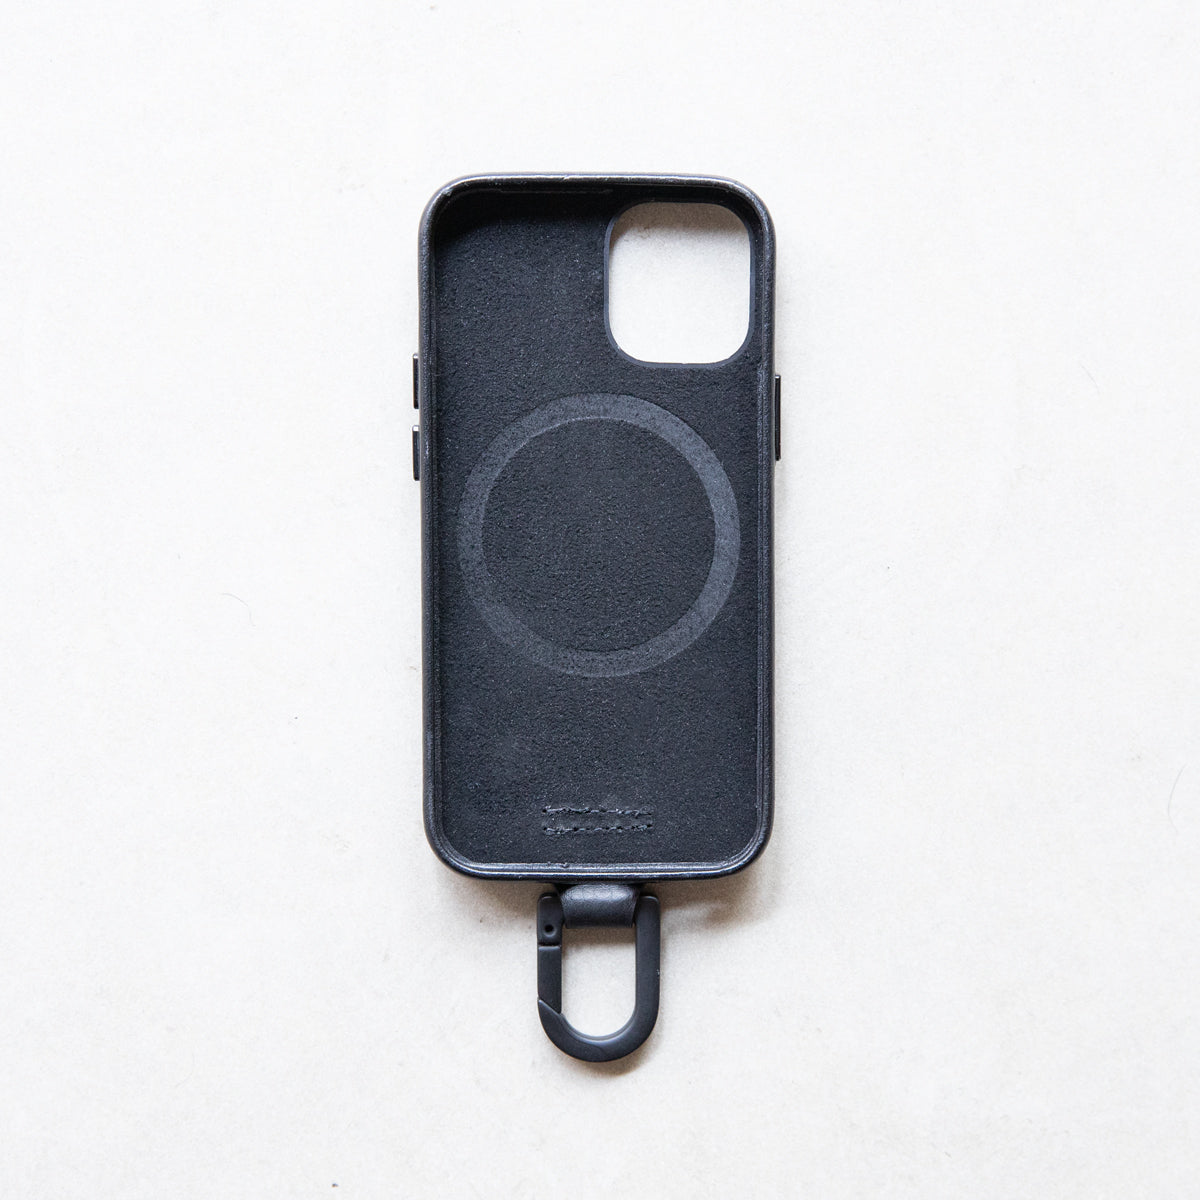 iPhone case with Adjustable Strap Accessory - Black